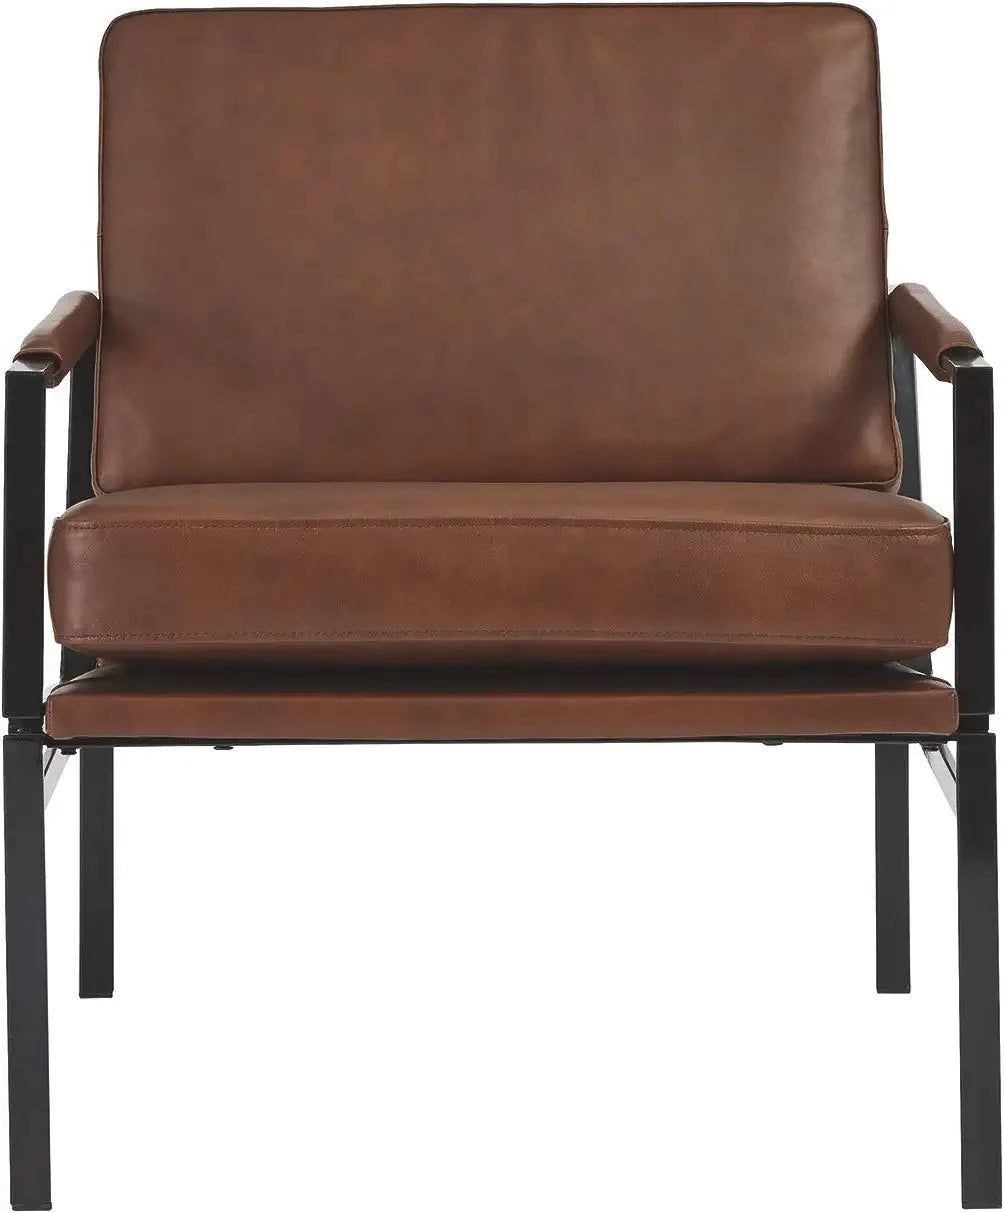 Brown Silver Finish-Amazon.com: Signature Design by Ashley Puckman Mid-Century Modern Leather Accent Chair, Black : Home & Kitchen